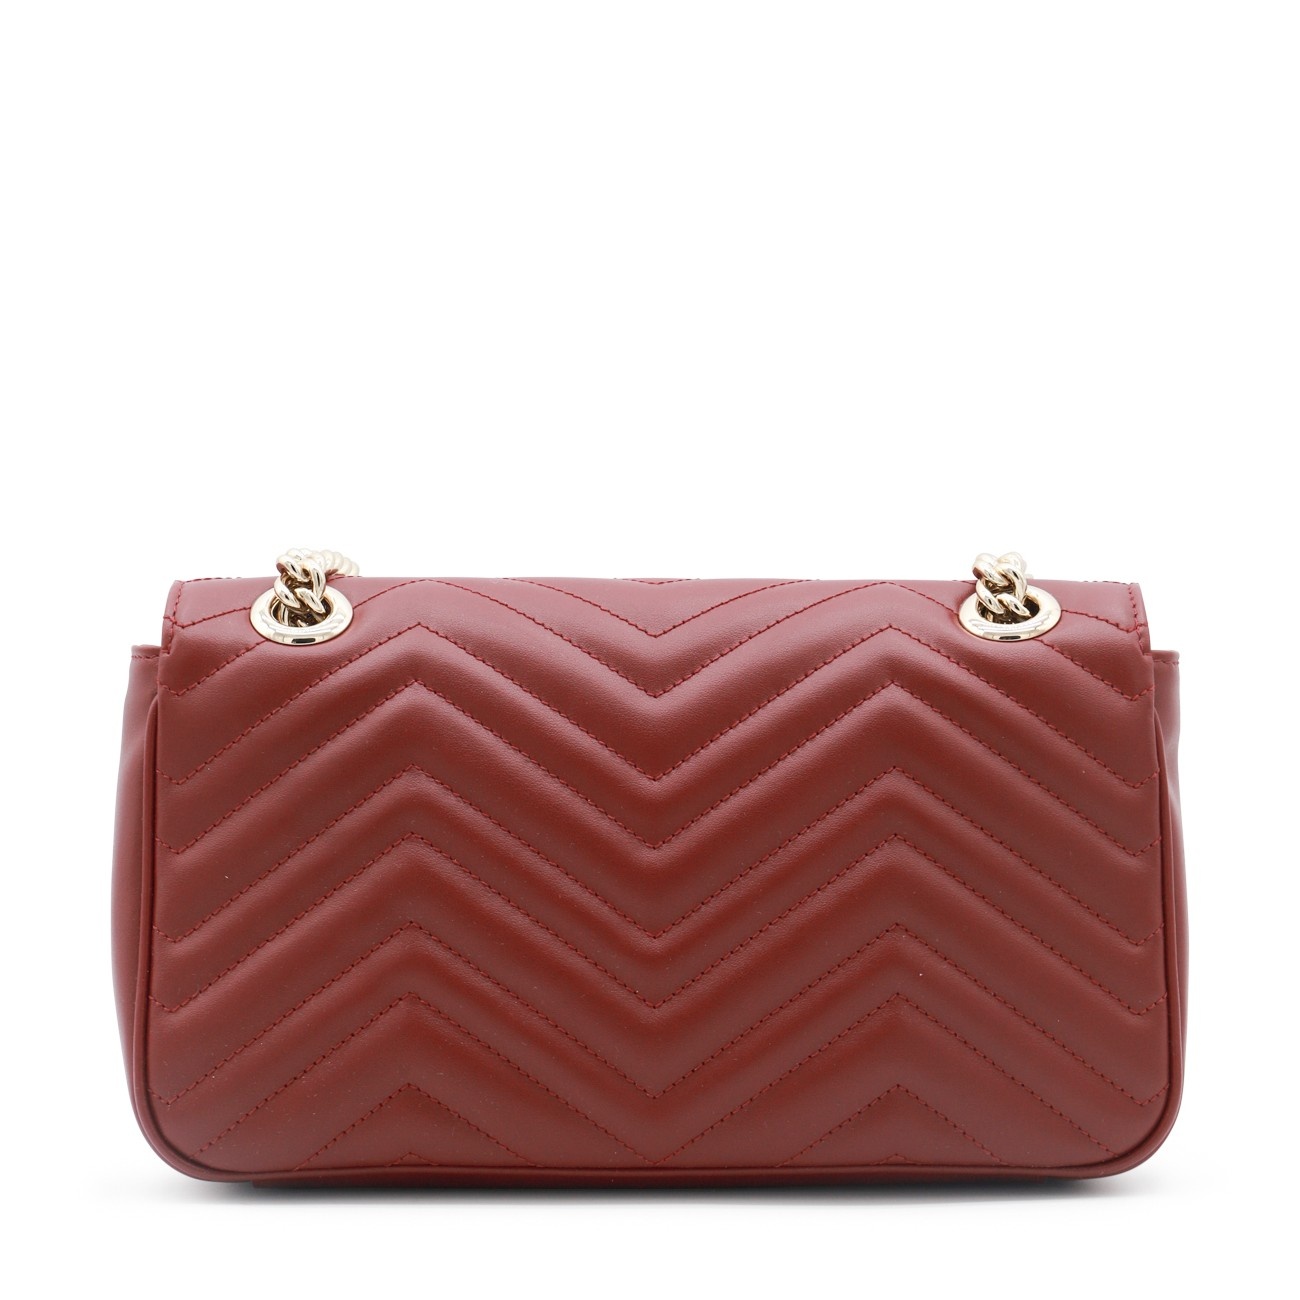 ancora red leather gg marmont 2.0 crossbody bag - 3